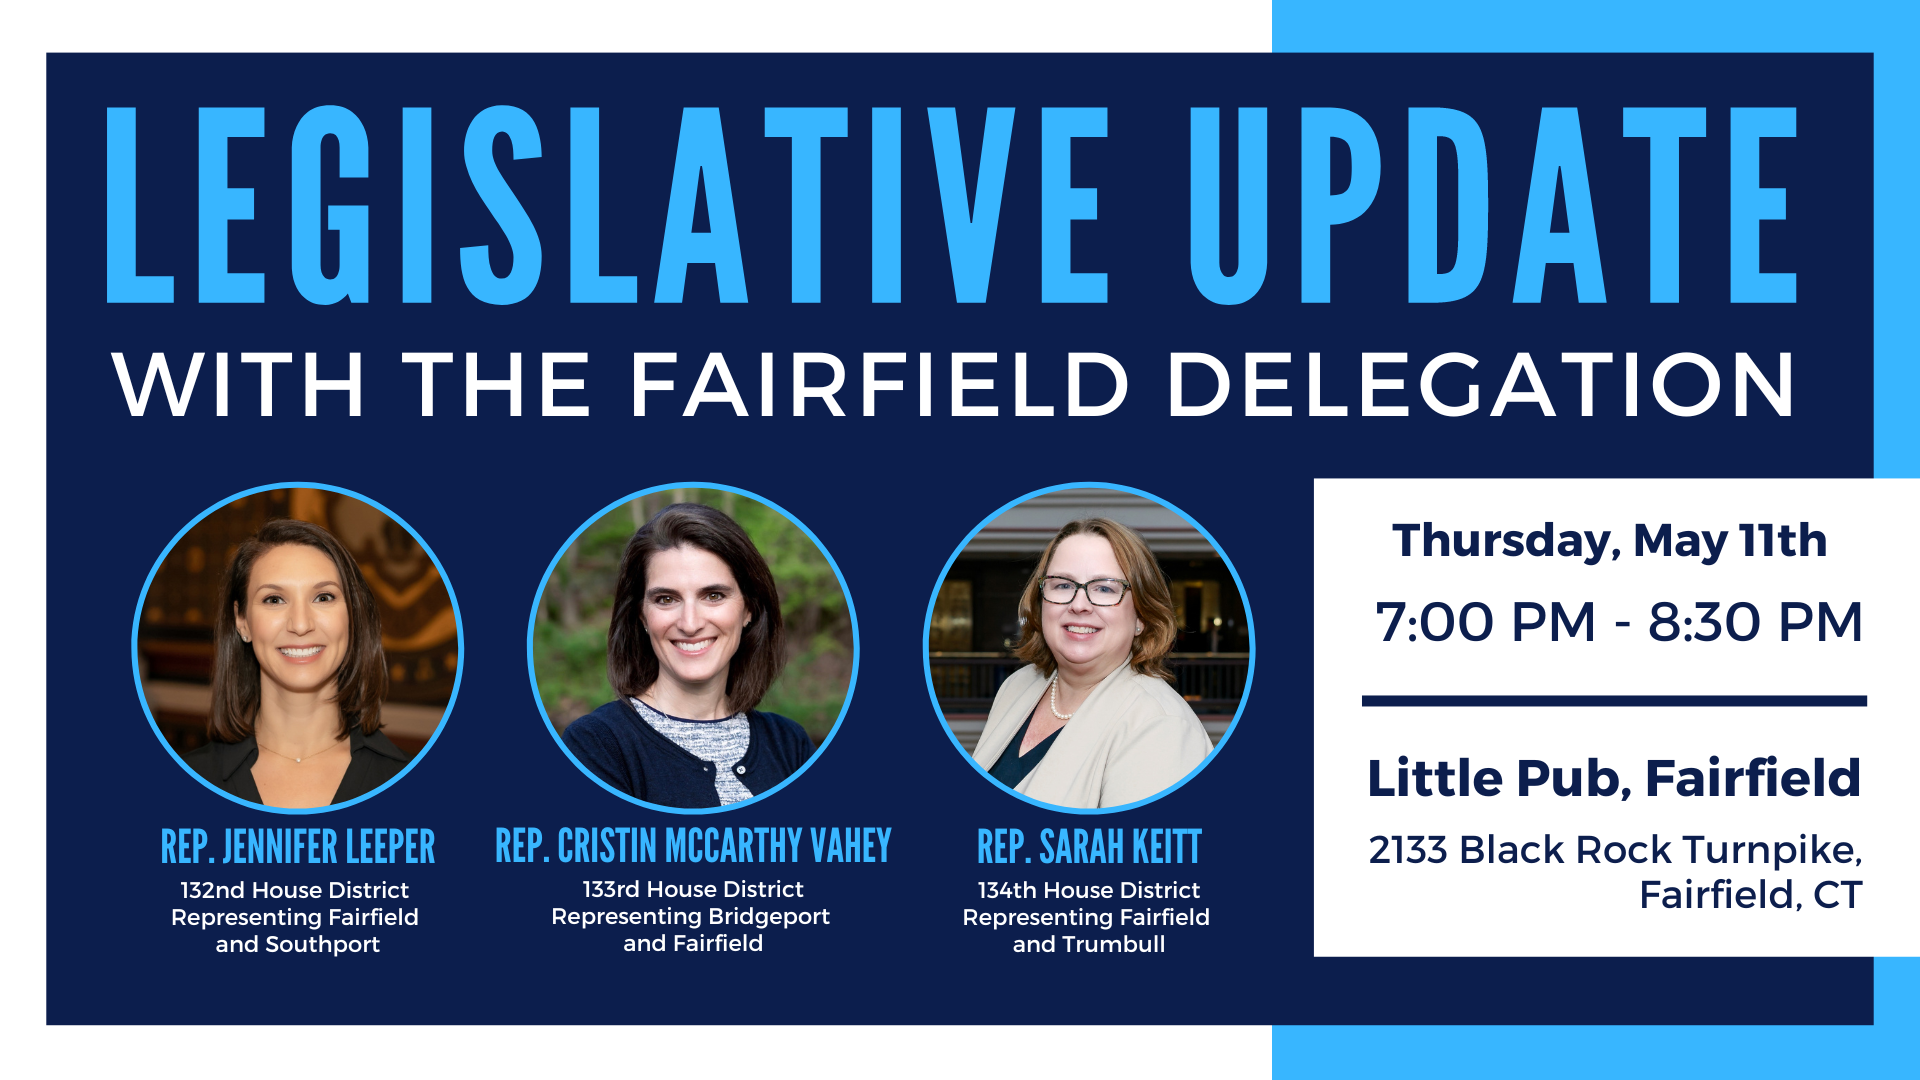 Legislative Update with the Fairfield House Delegation, May 11